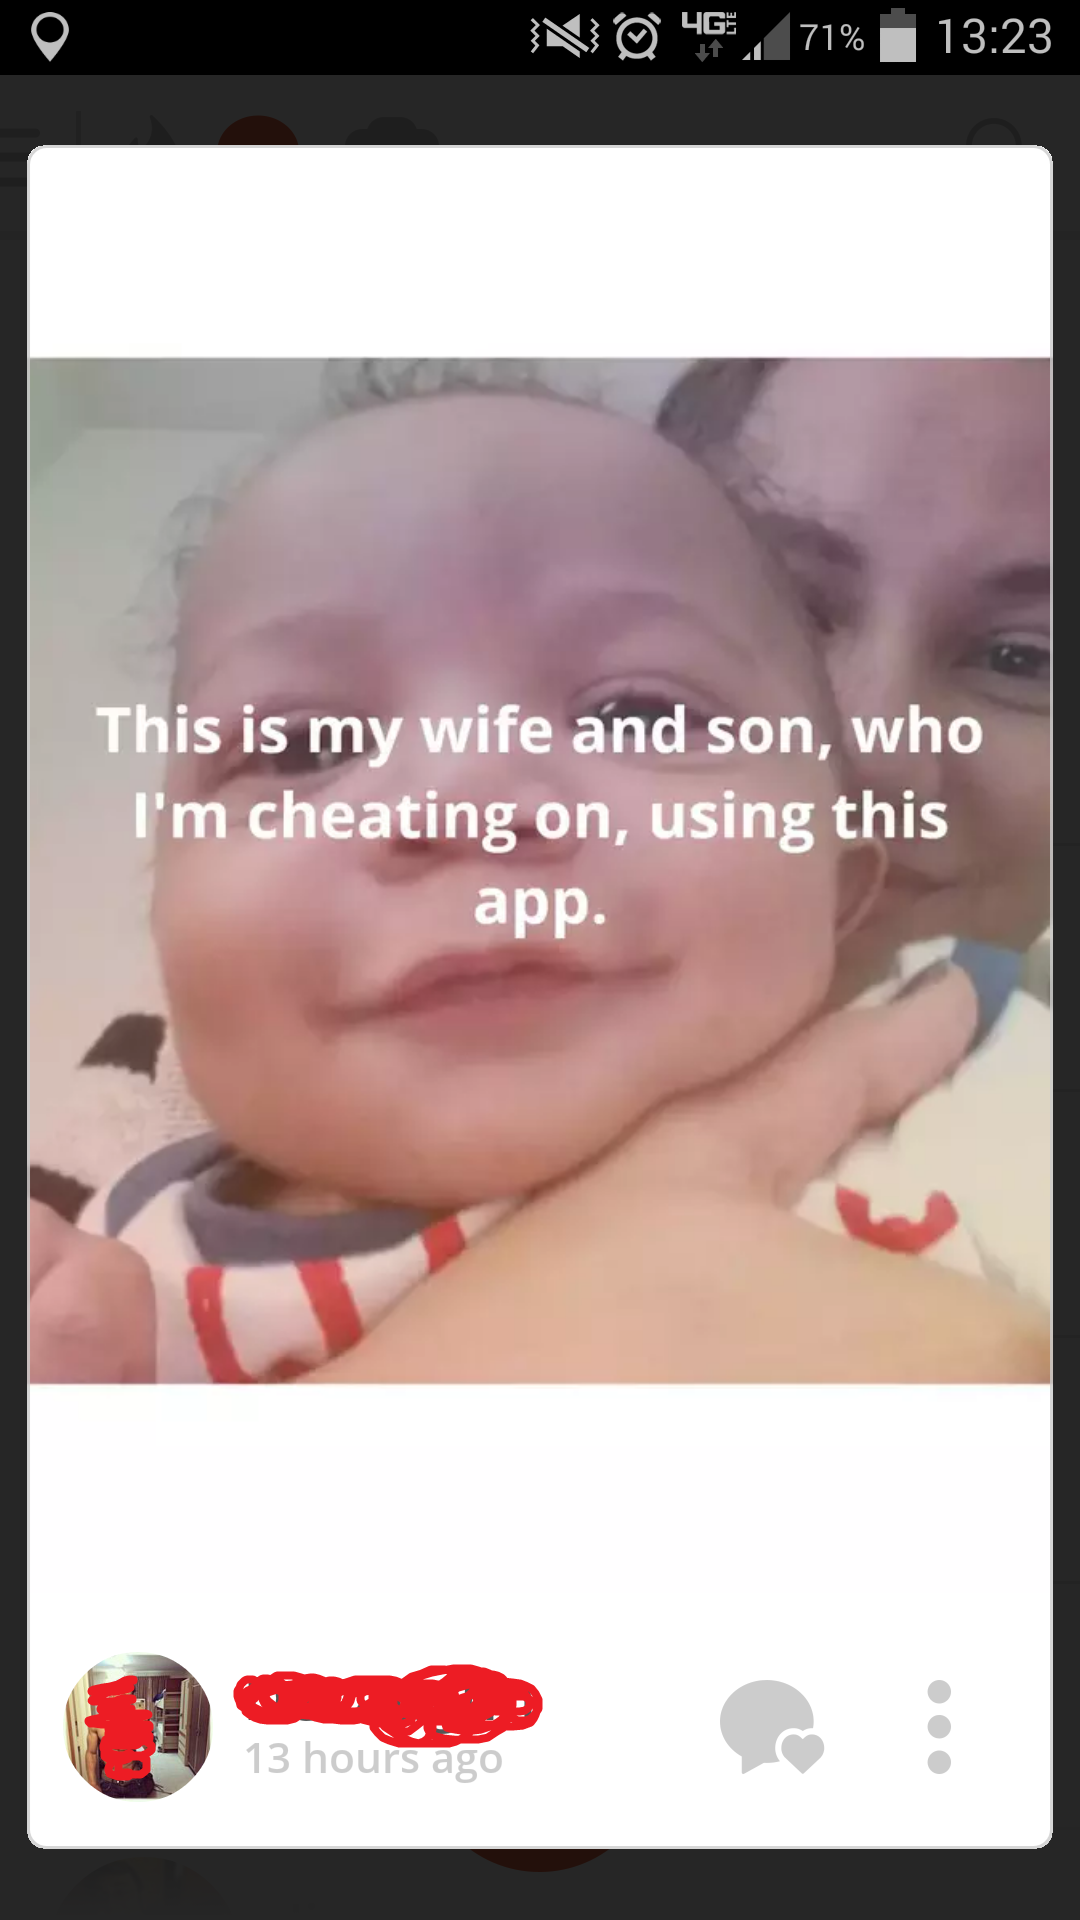 tinder cheaters - No 4971% This is my wife and son, who I'm cheating on, using this app. 13 hours ago